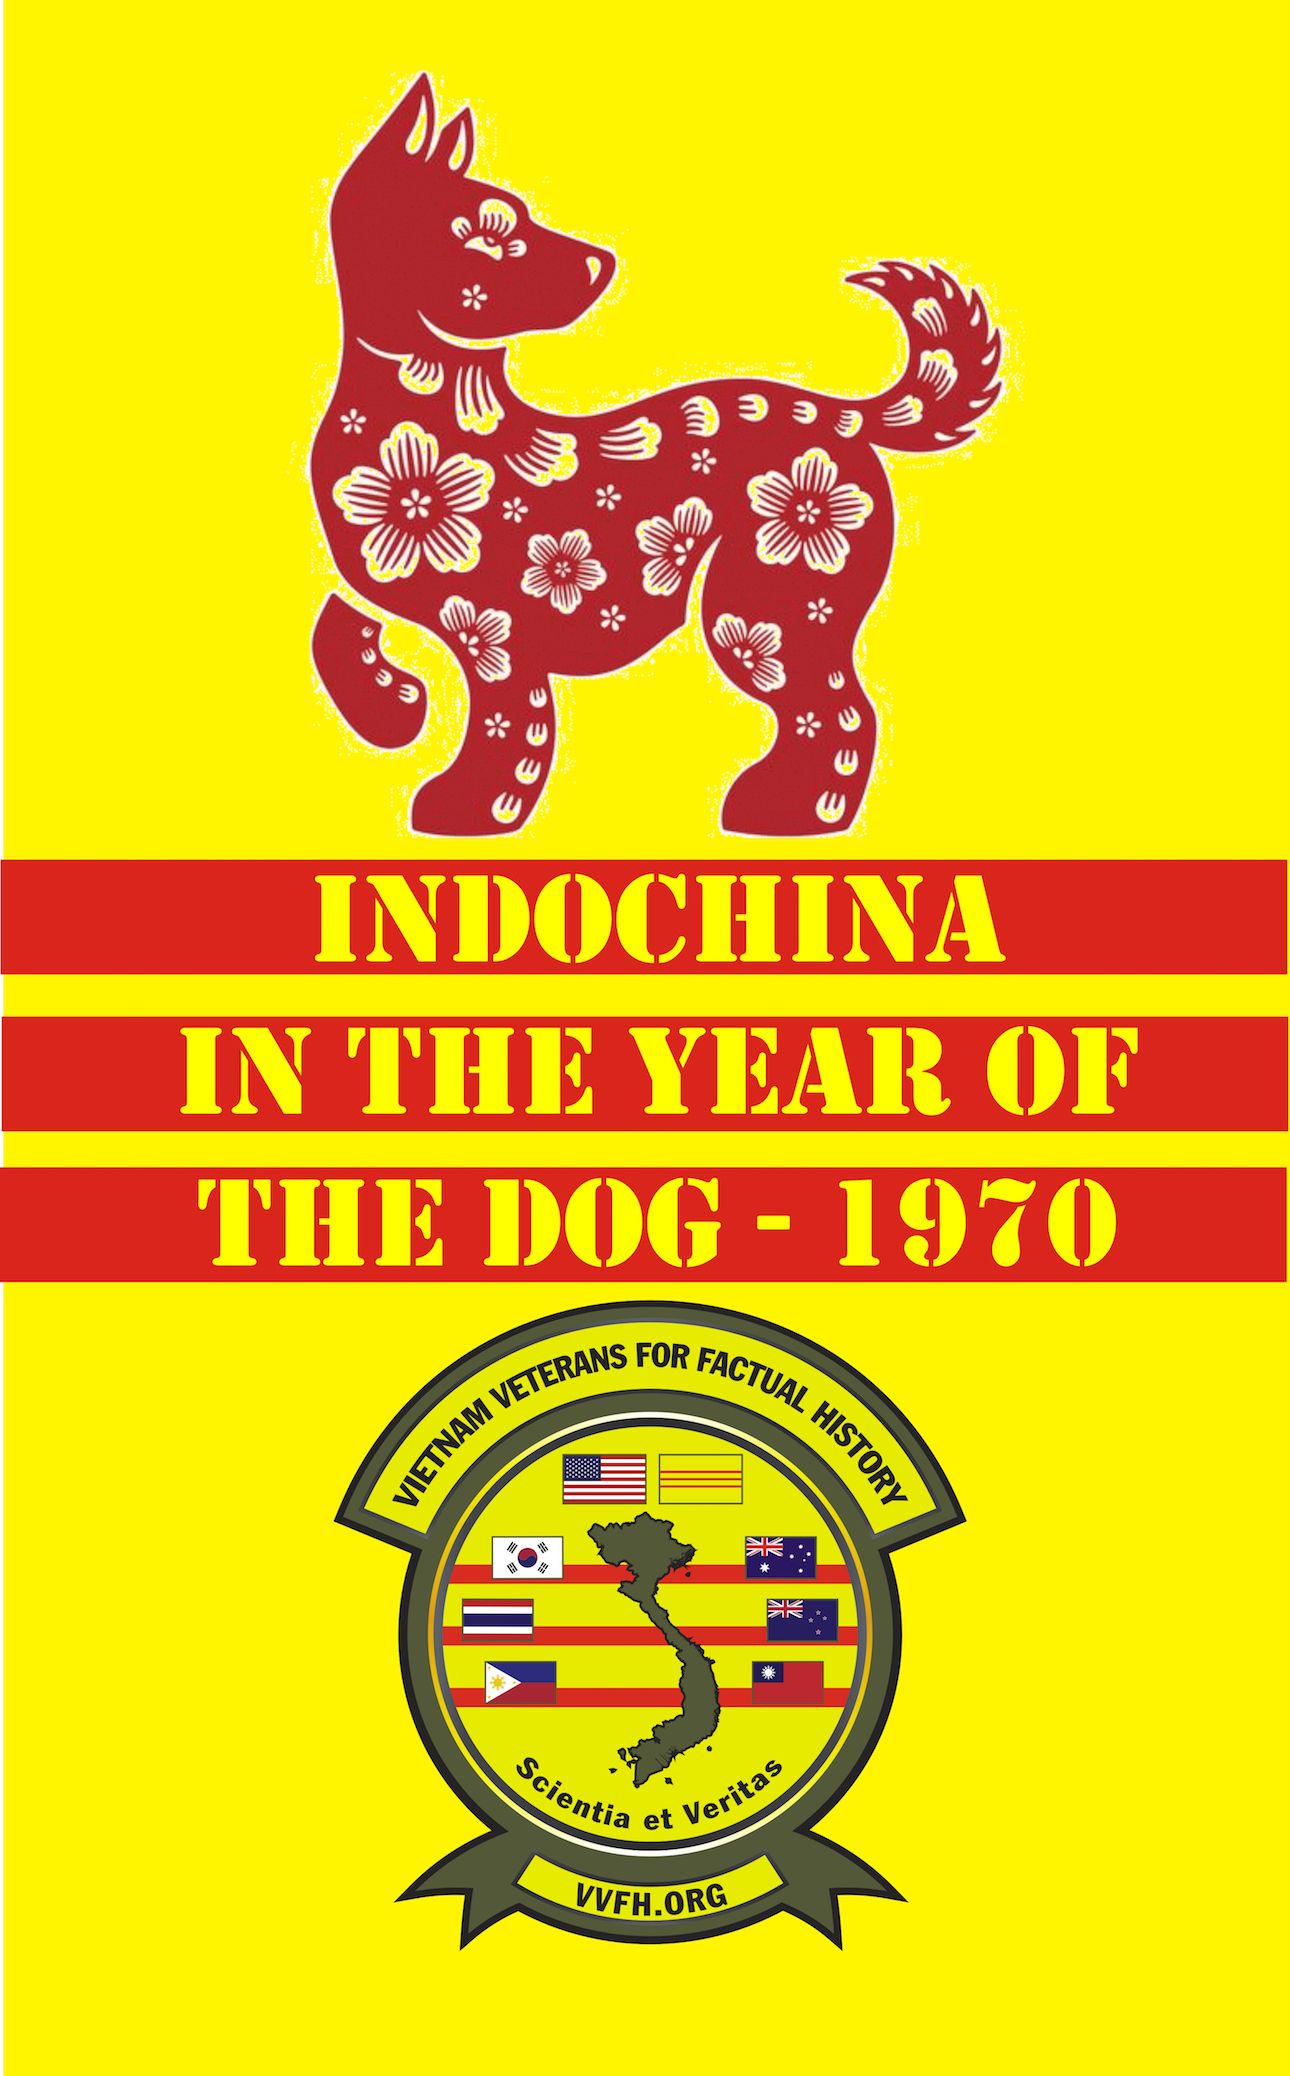 1970 Indochina in the Year of the Dog